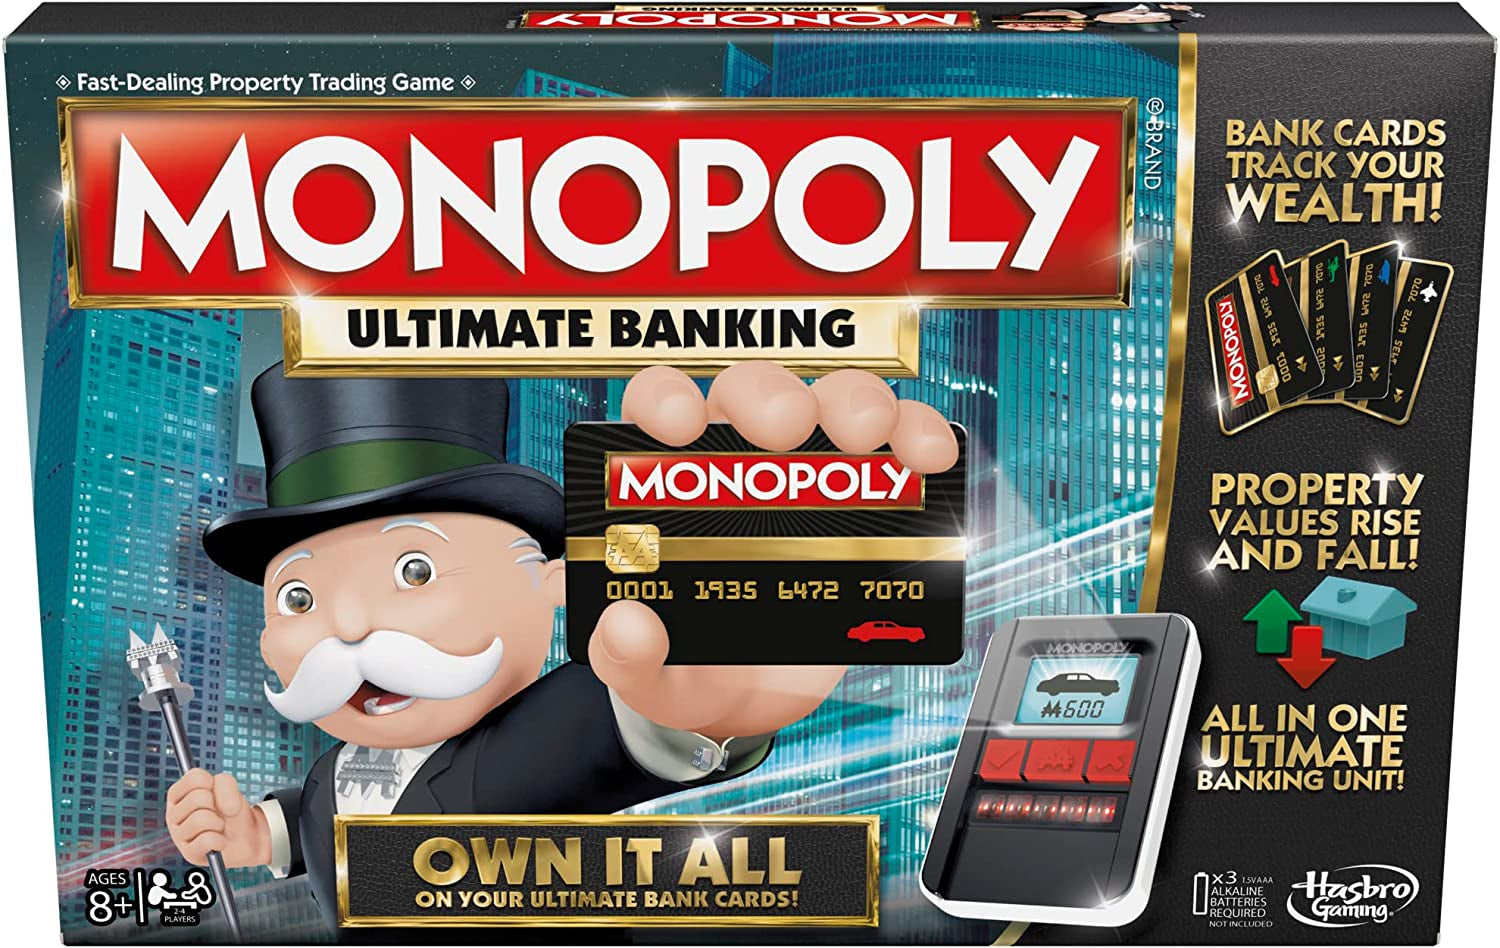 Monopoly Ultimate Banking Board Game - Electronic Banking - Ages 8+